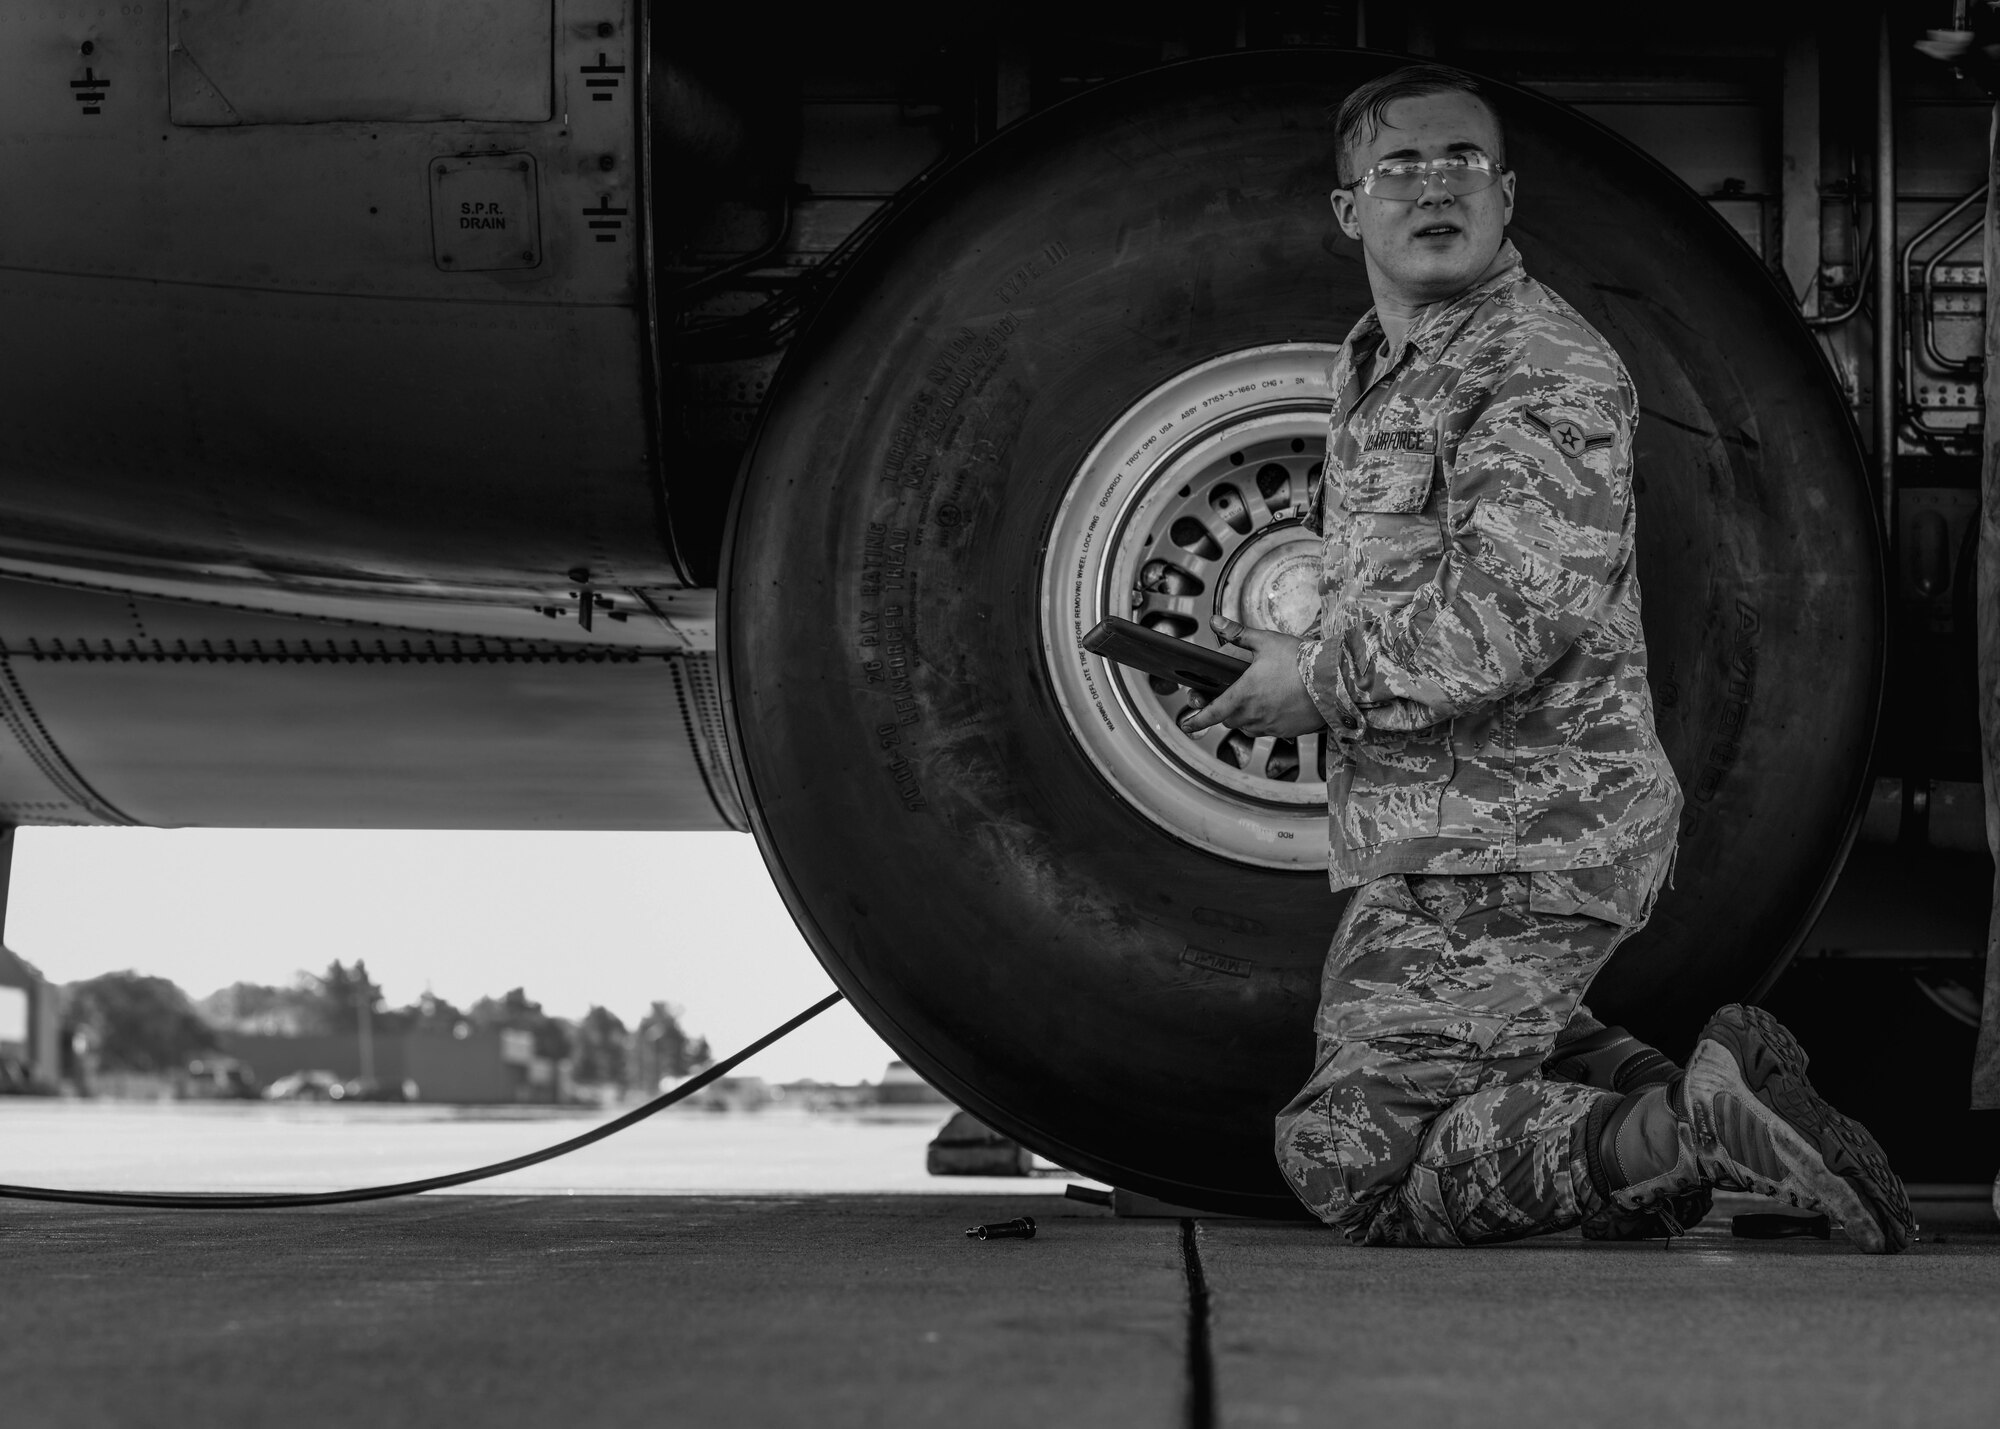 Members from the 910th Maintenance Group spent the morning changing a tire on an aircraft due to the normal wear and tear of routine takeoffs and landings.